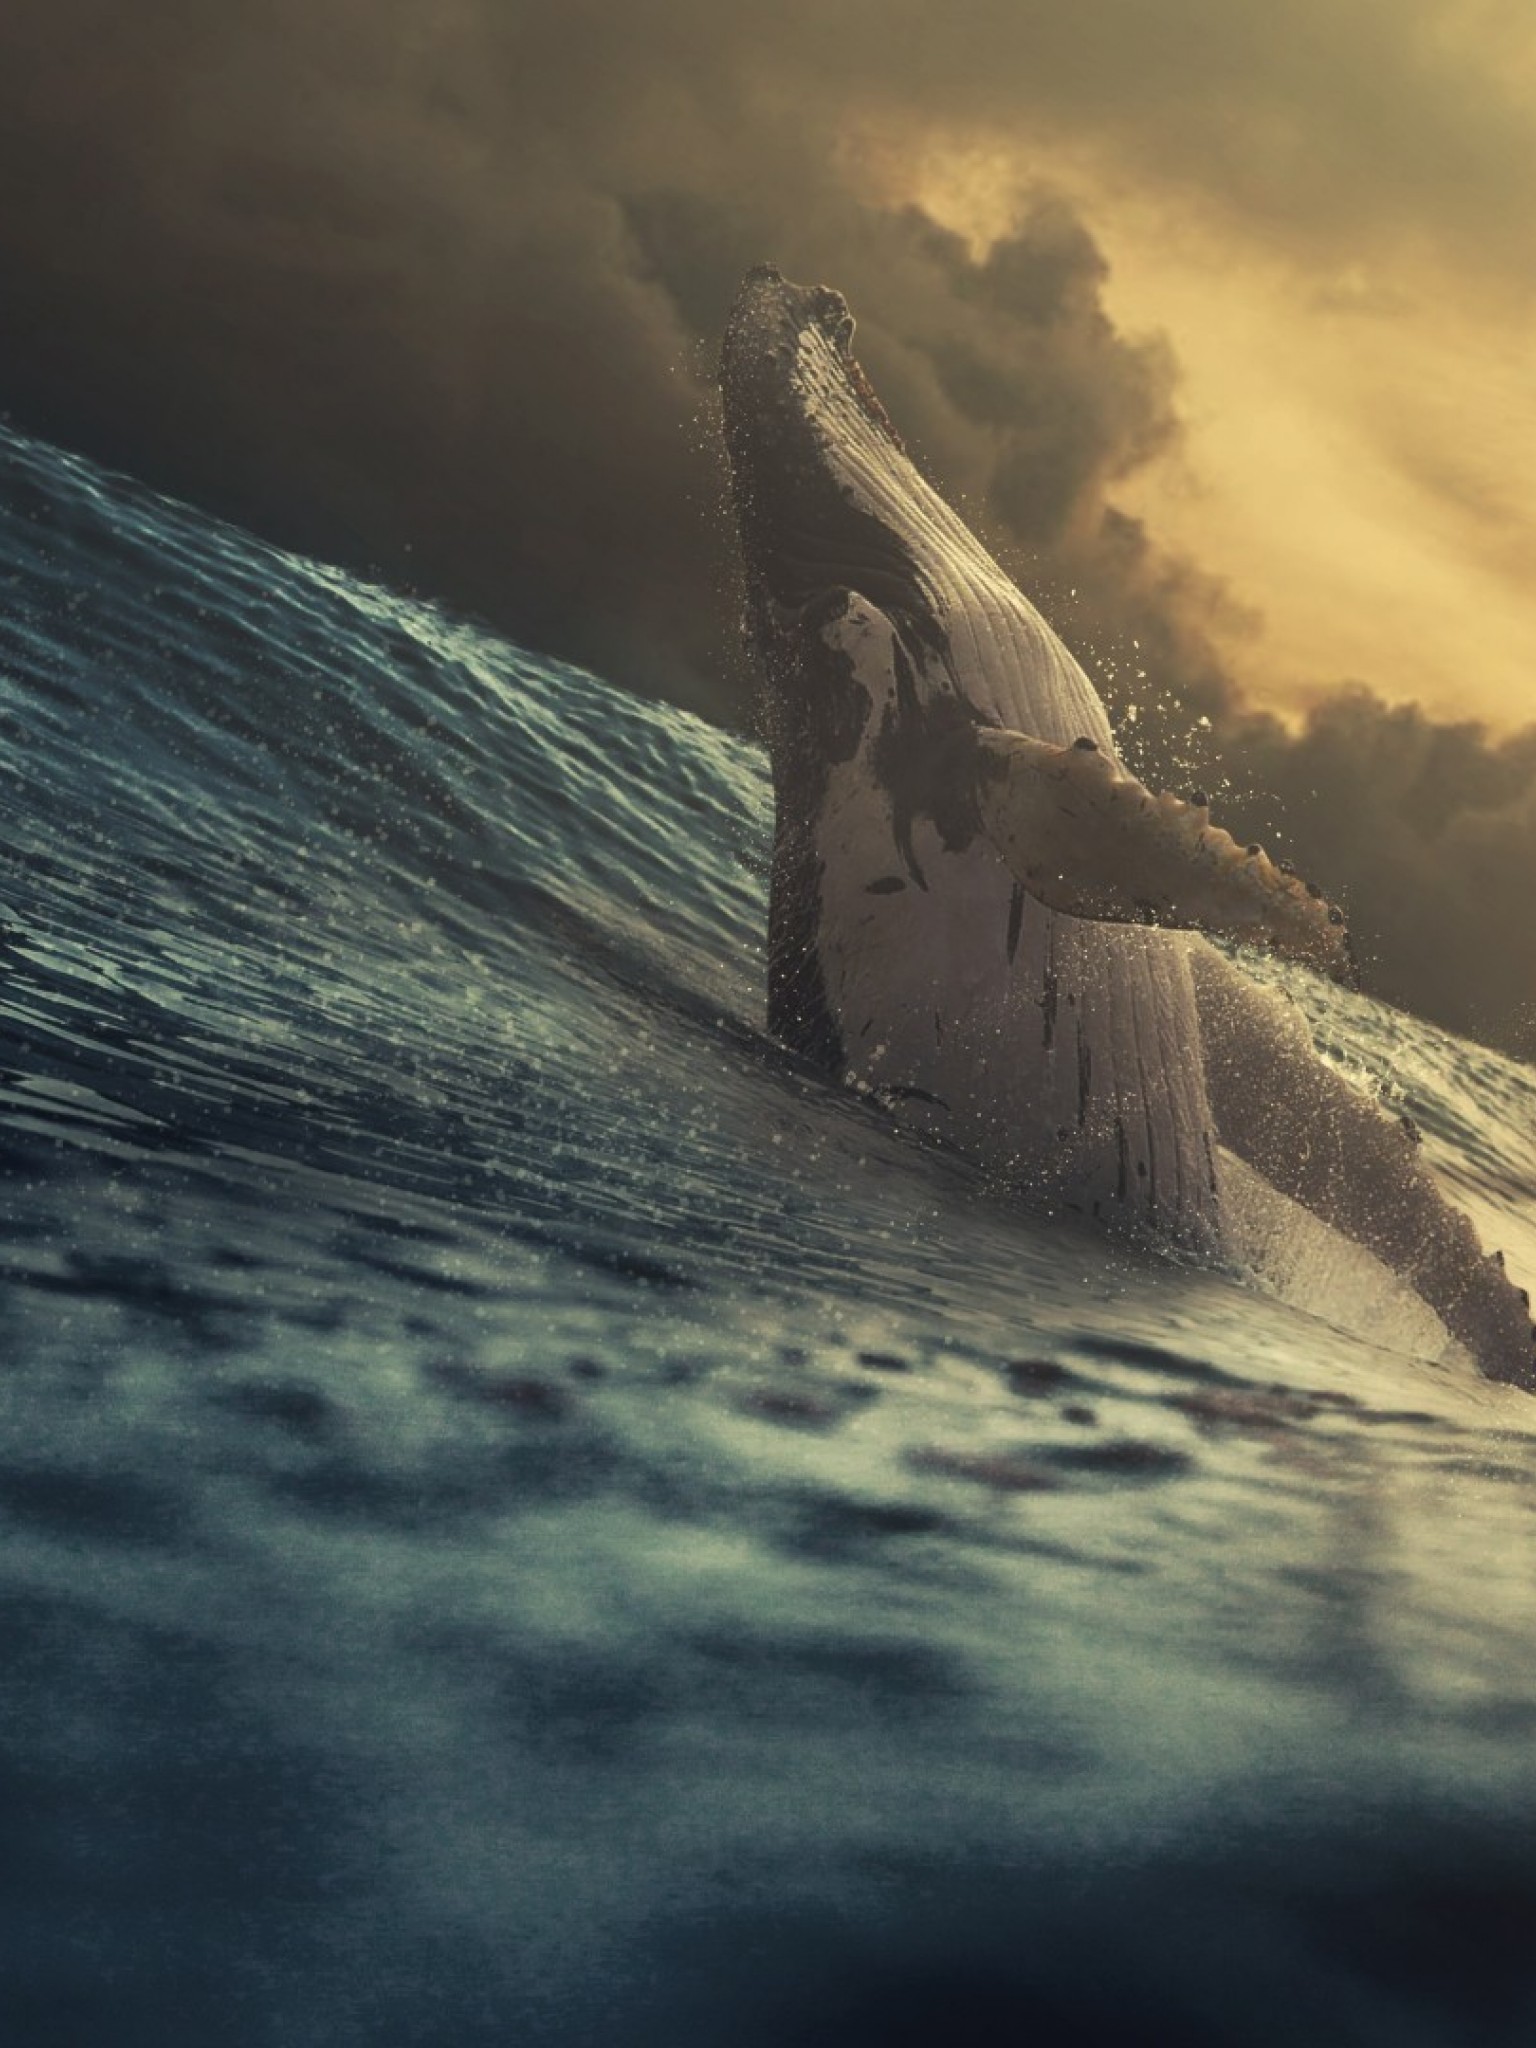 Giant whale at the ocean HD Wallpaper